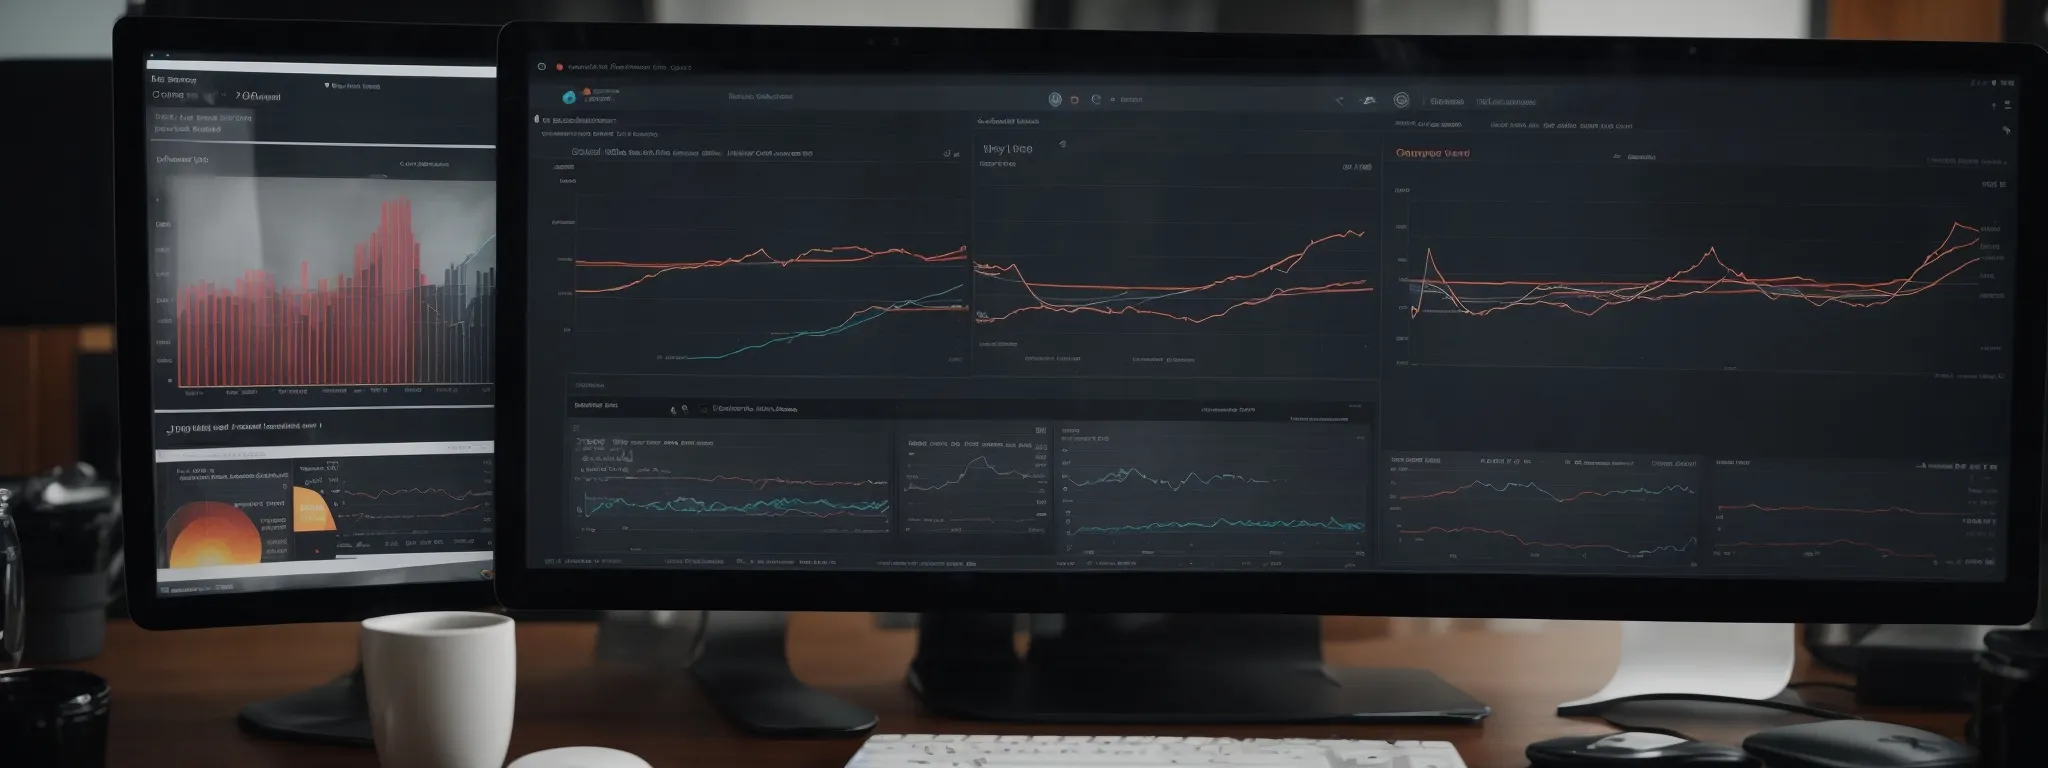 a computer screen displays real-time seo analytics graphs while a user manages automated keyword tracking on searchatlas software.